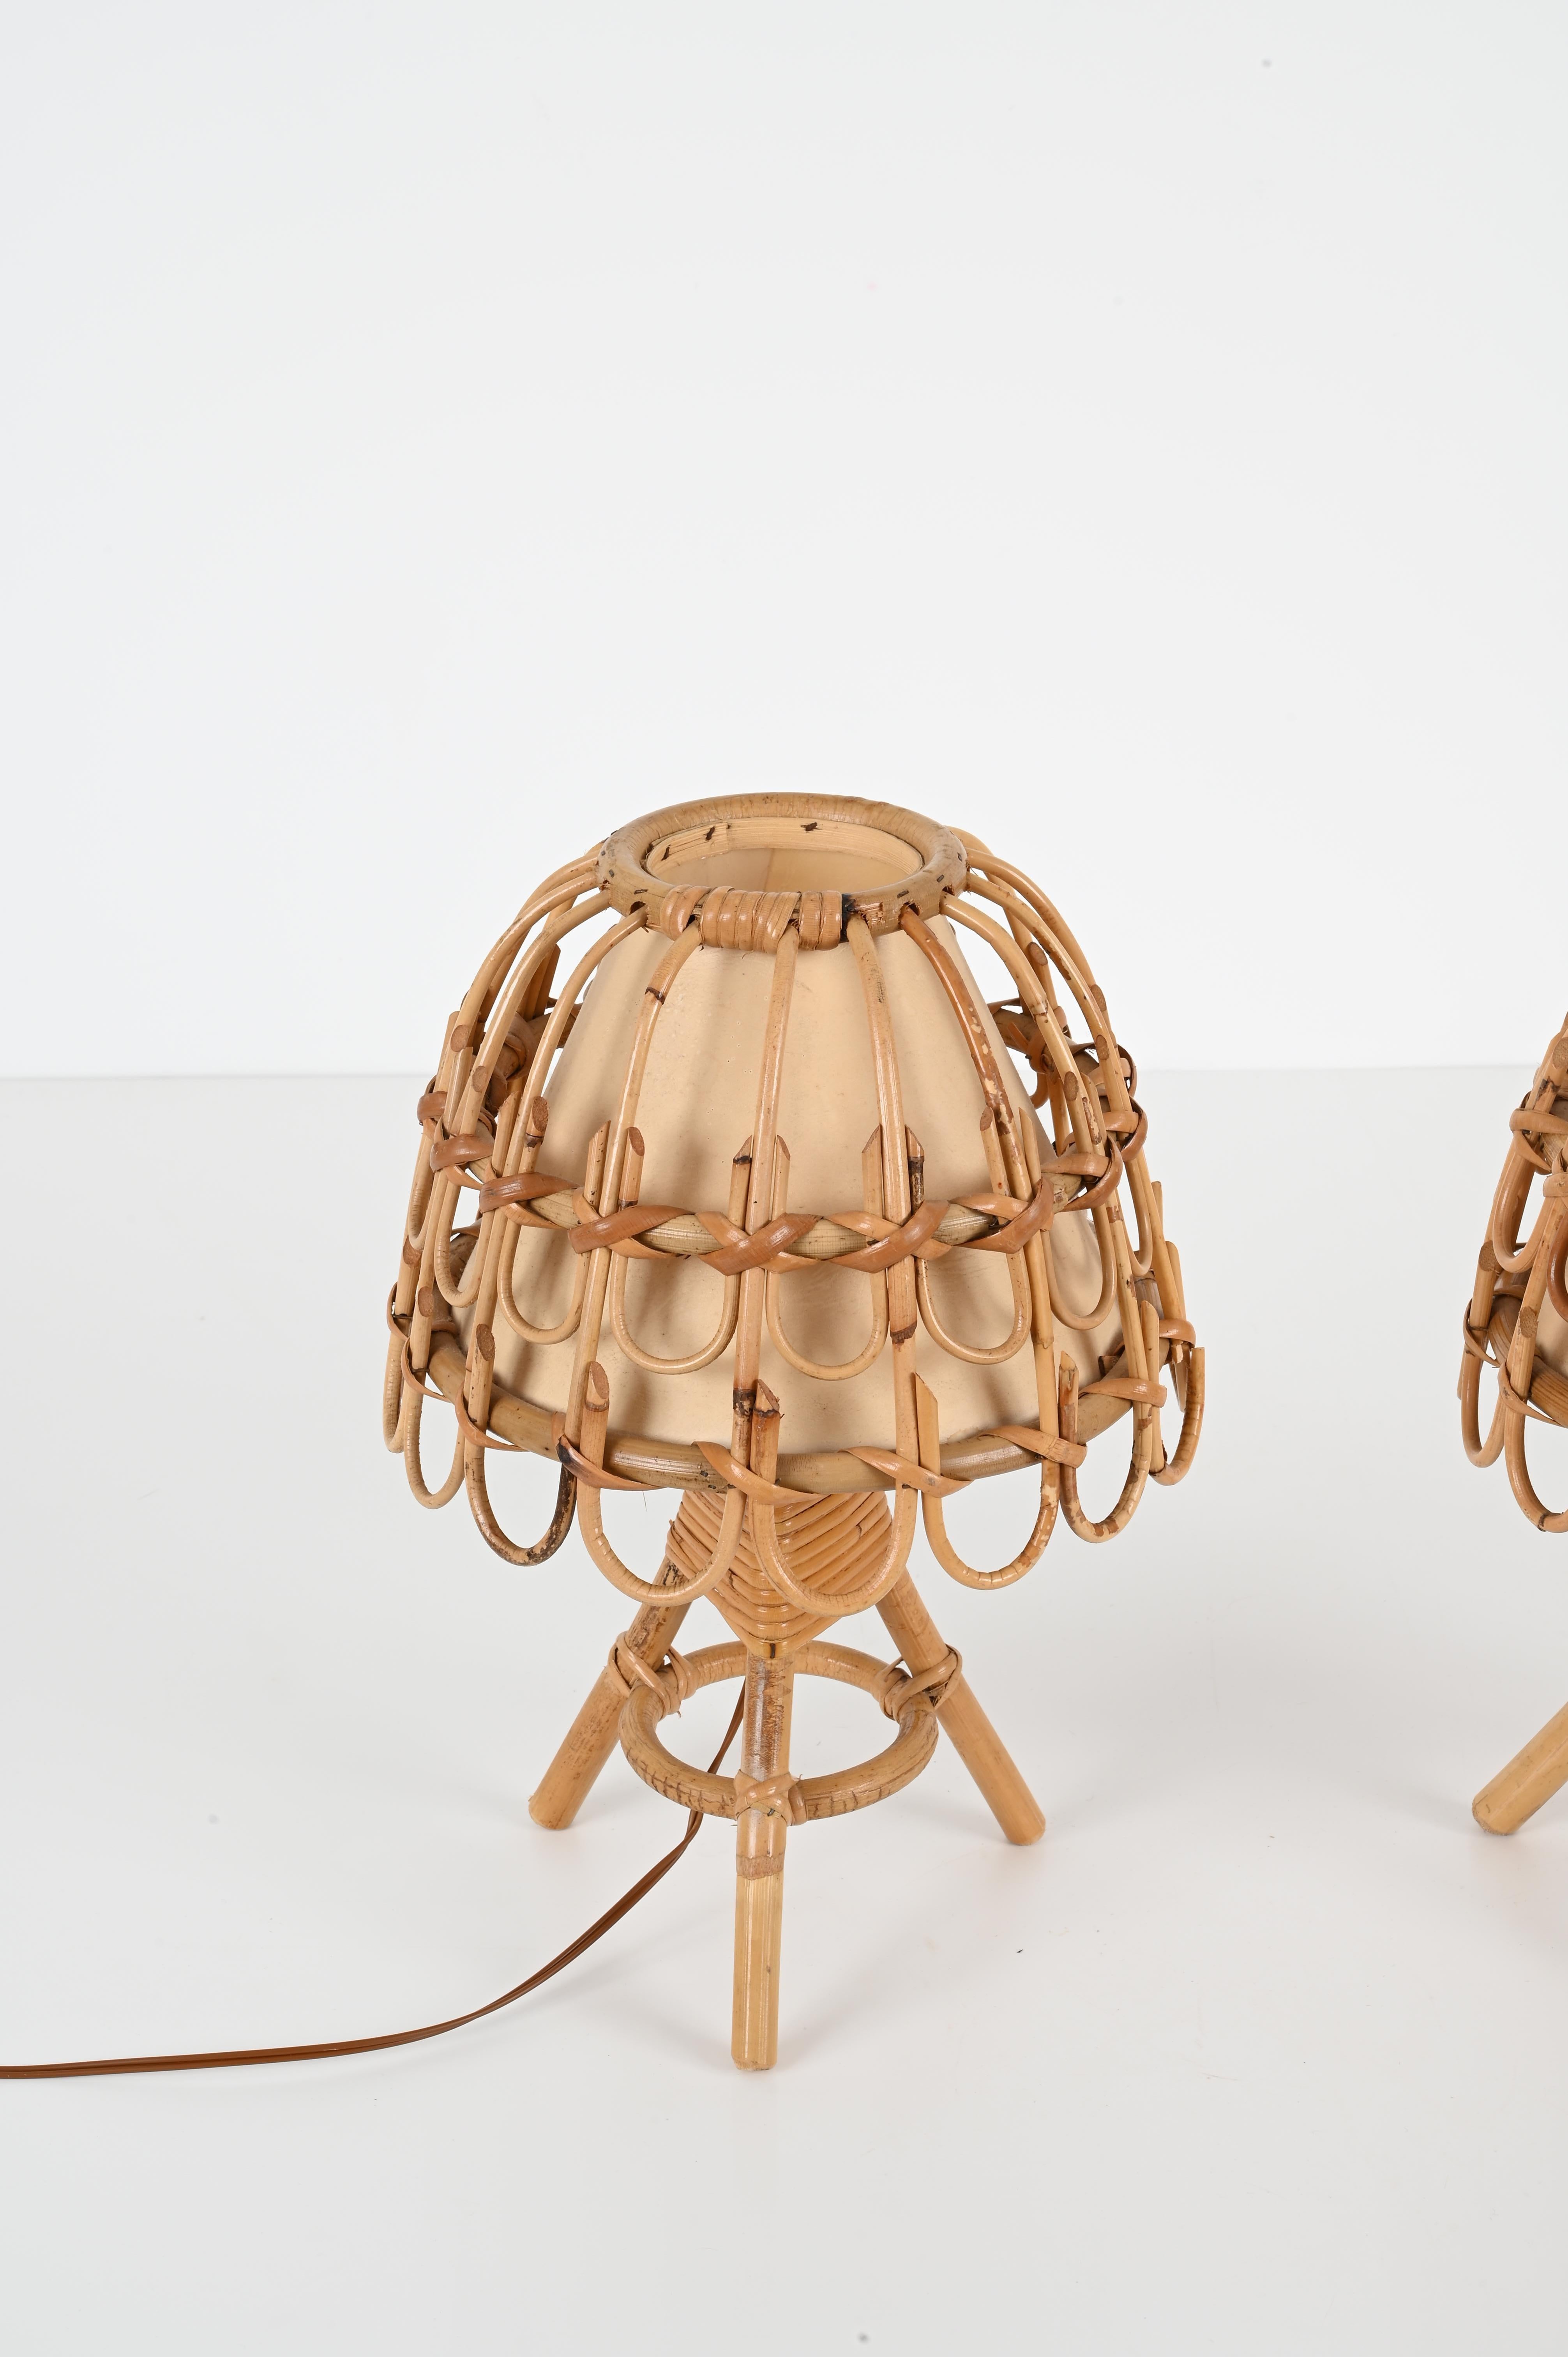 Pair of Midcentury Table Lamps in Rattan and Wicker, Louis Sognot, France, 1960s 1